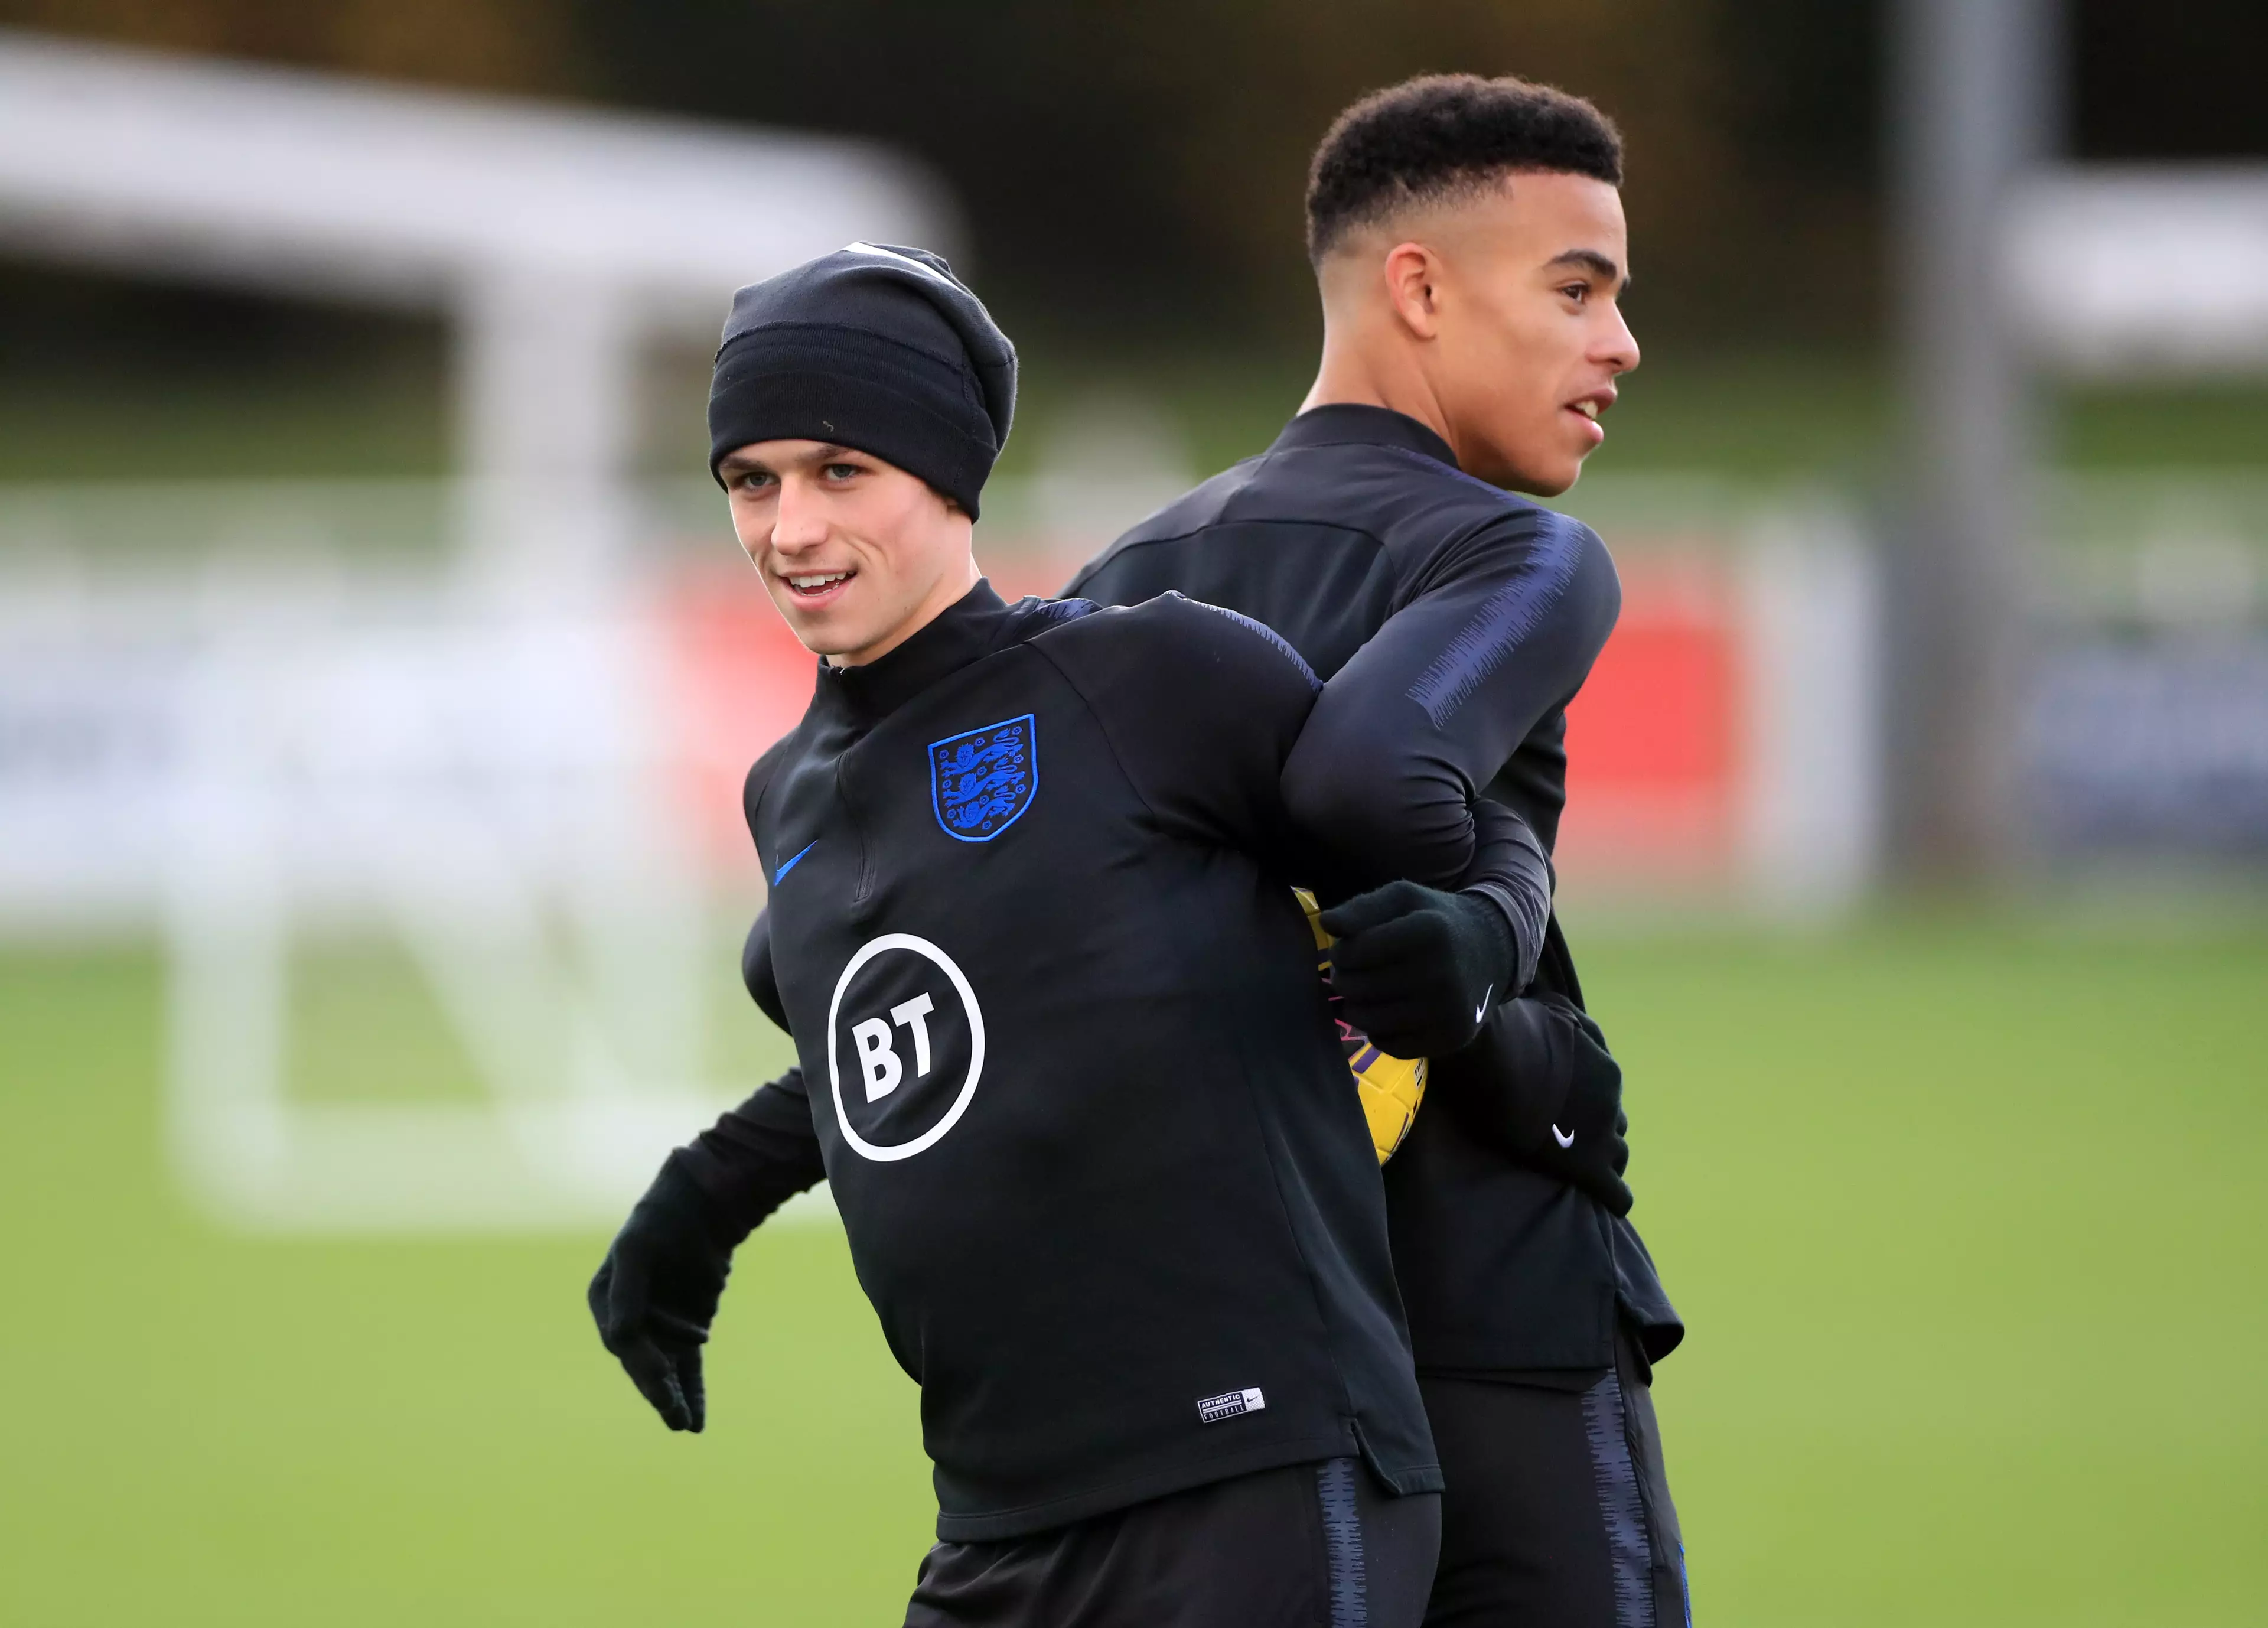 Greenwood and Foden got in trouble on England duty back in August. Image: PA Images